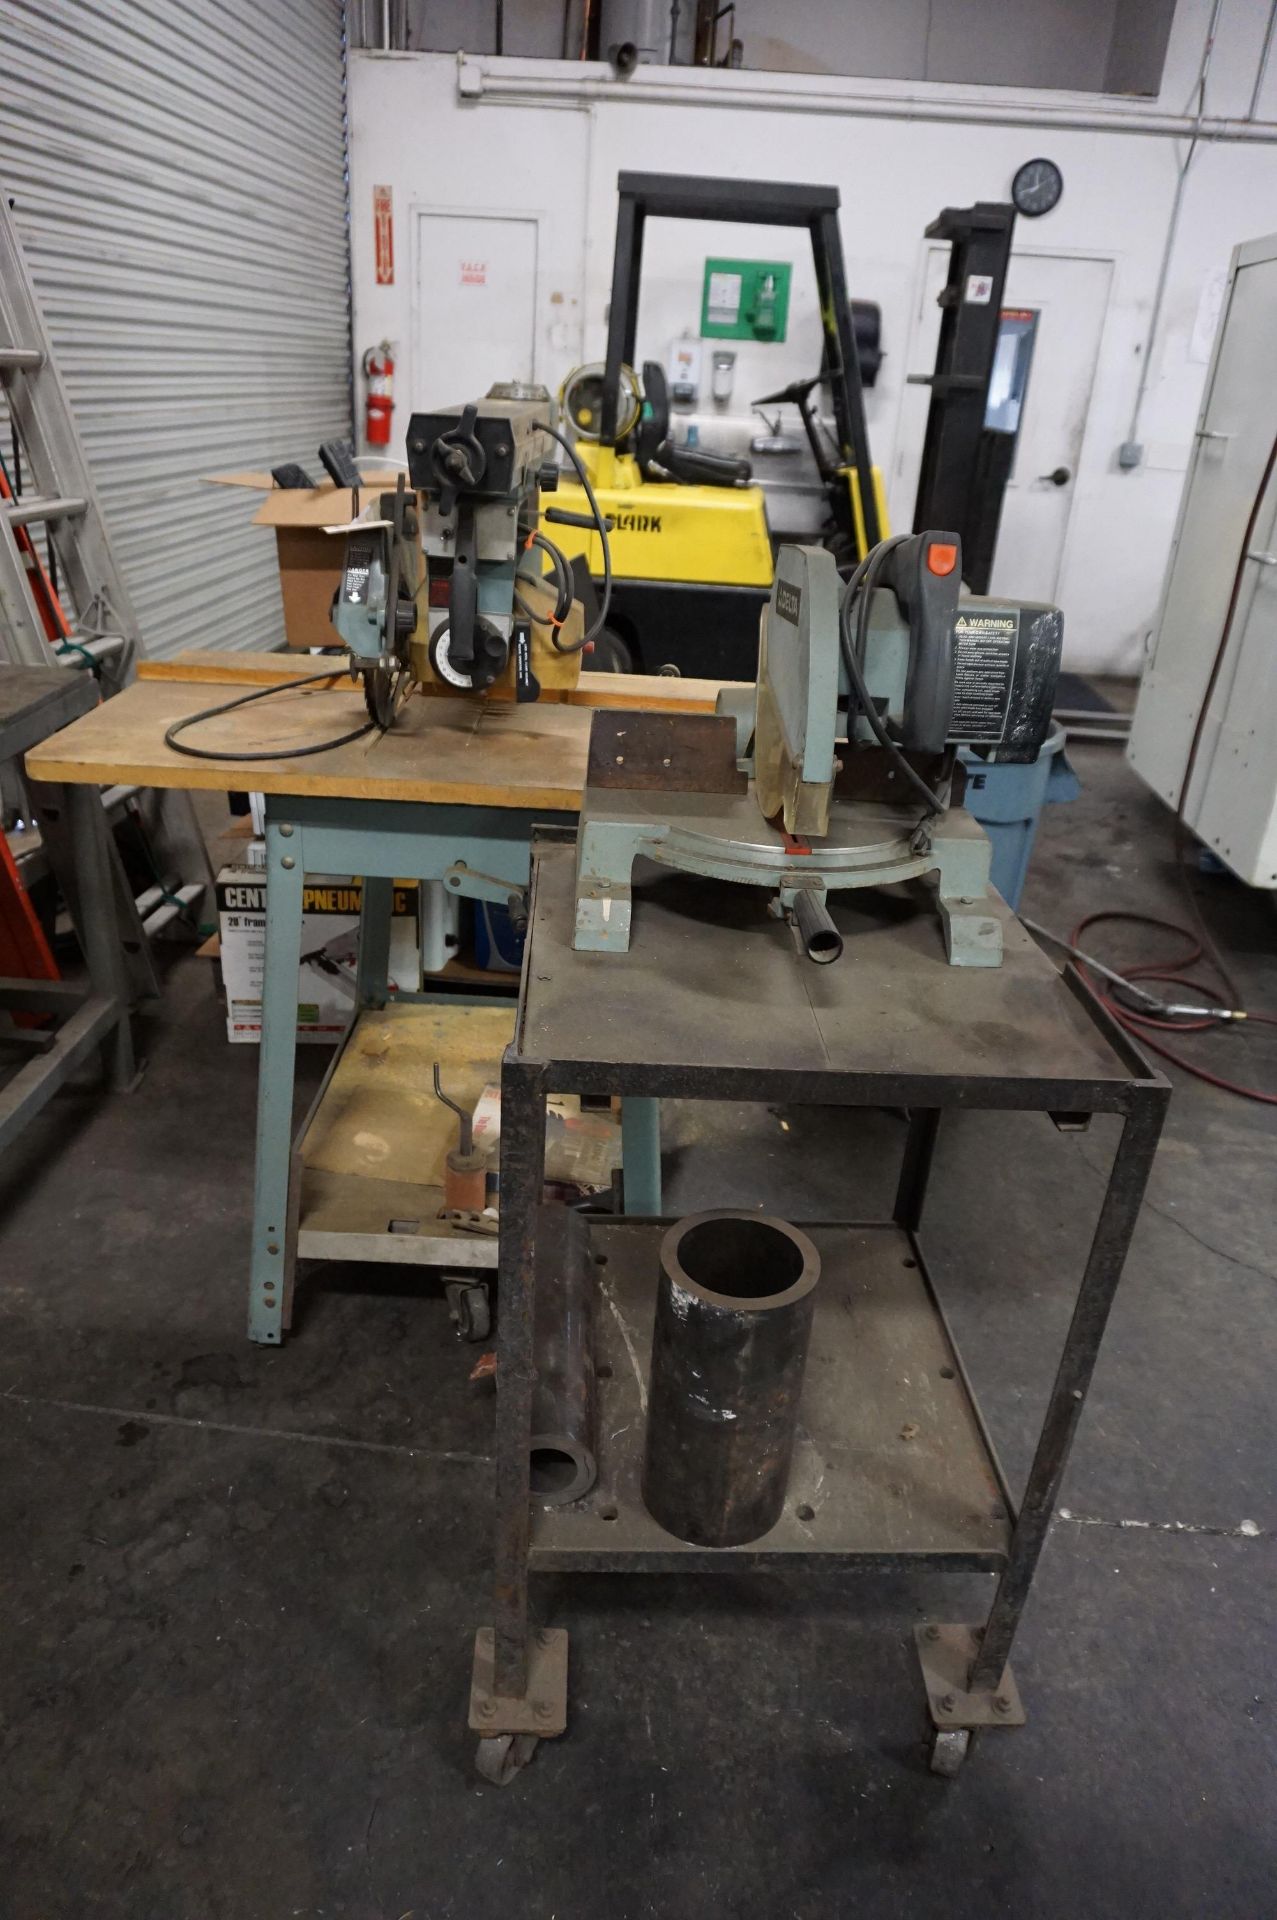 LOT TO INCLUDE: DELTA MODEL 10 RADIAL ARM TABLE SAW, DELTA 10" MITER SAW MODEL 34-080